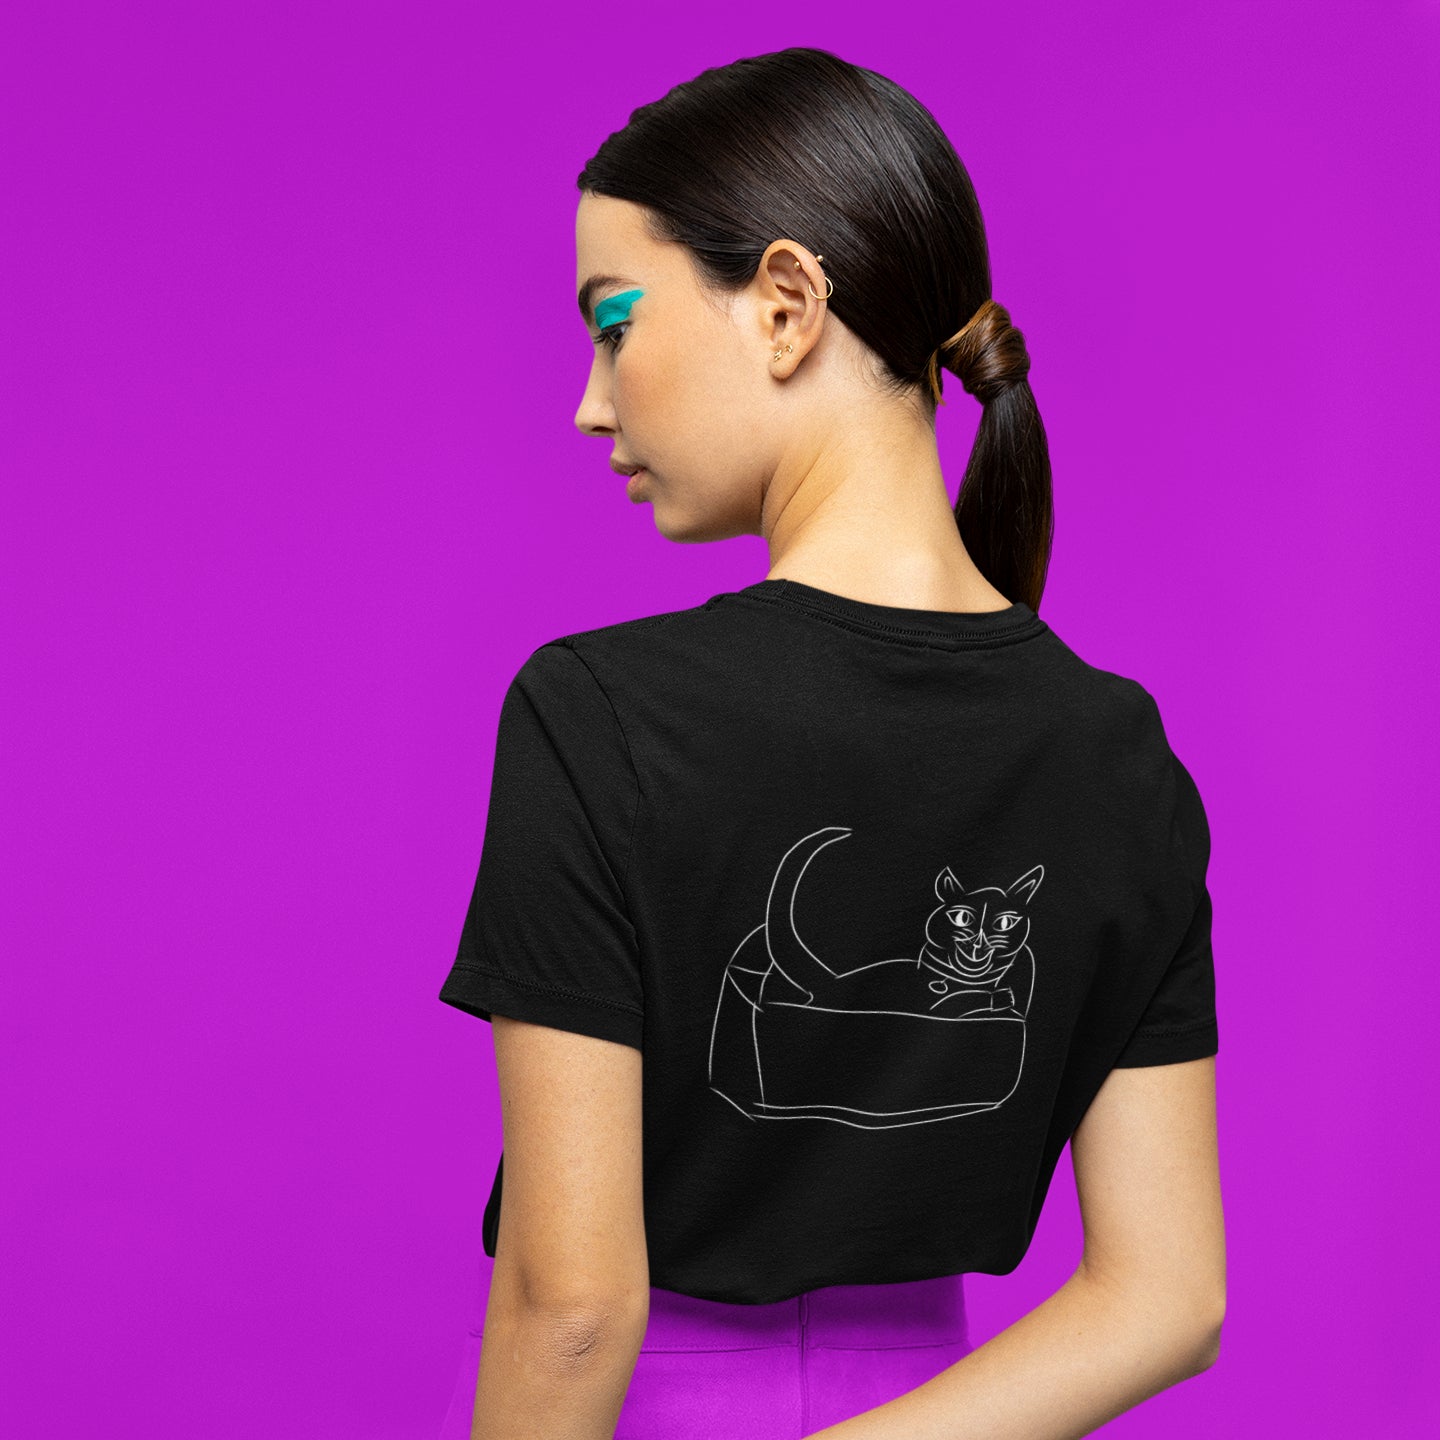 Cat white | 100% Organic Cotton T Shirt worn by a woman against a purple background